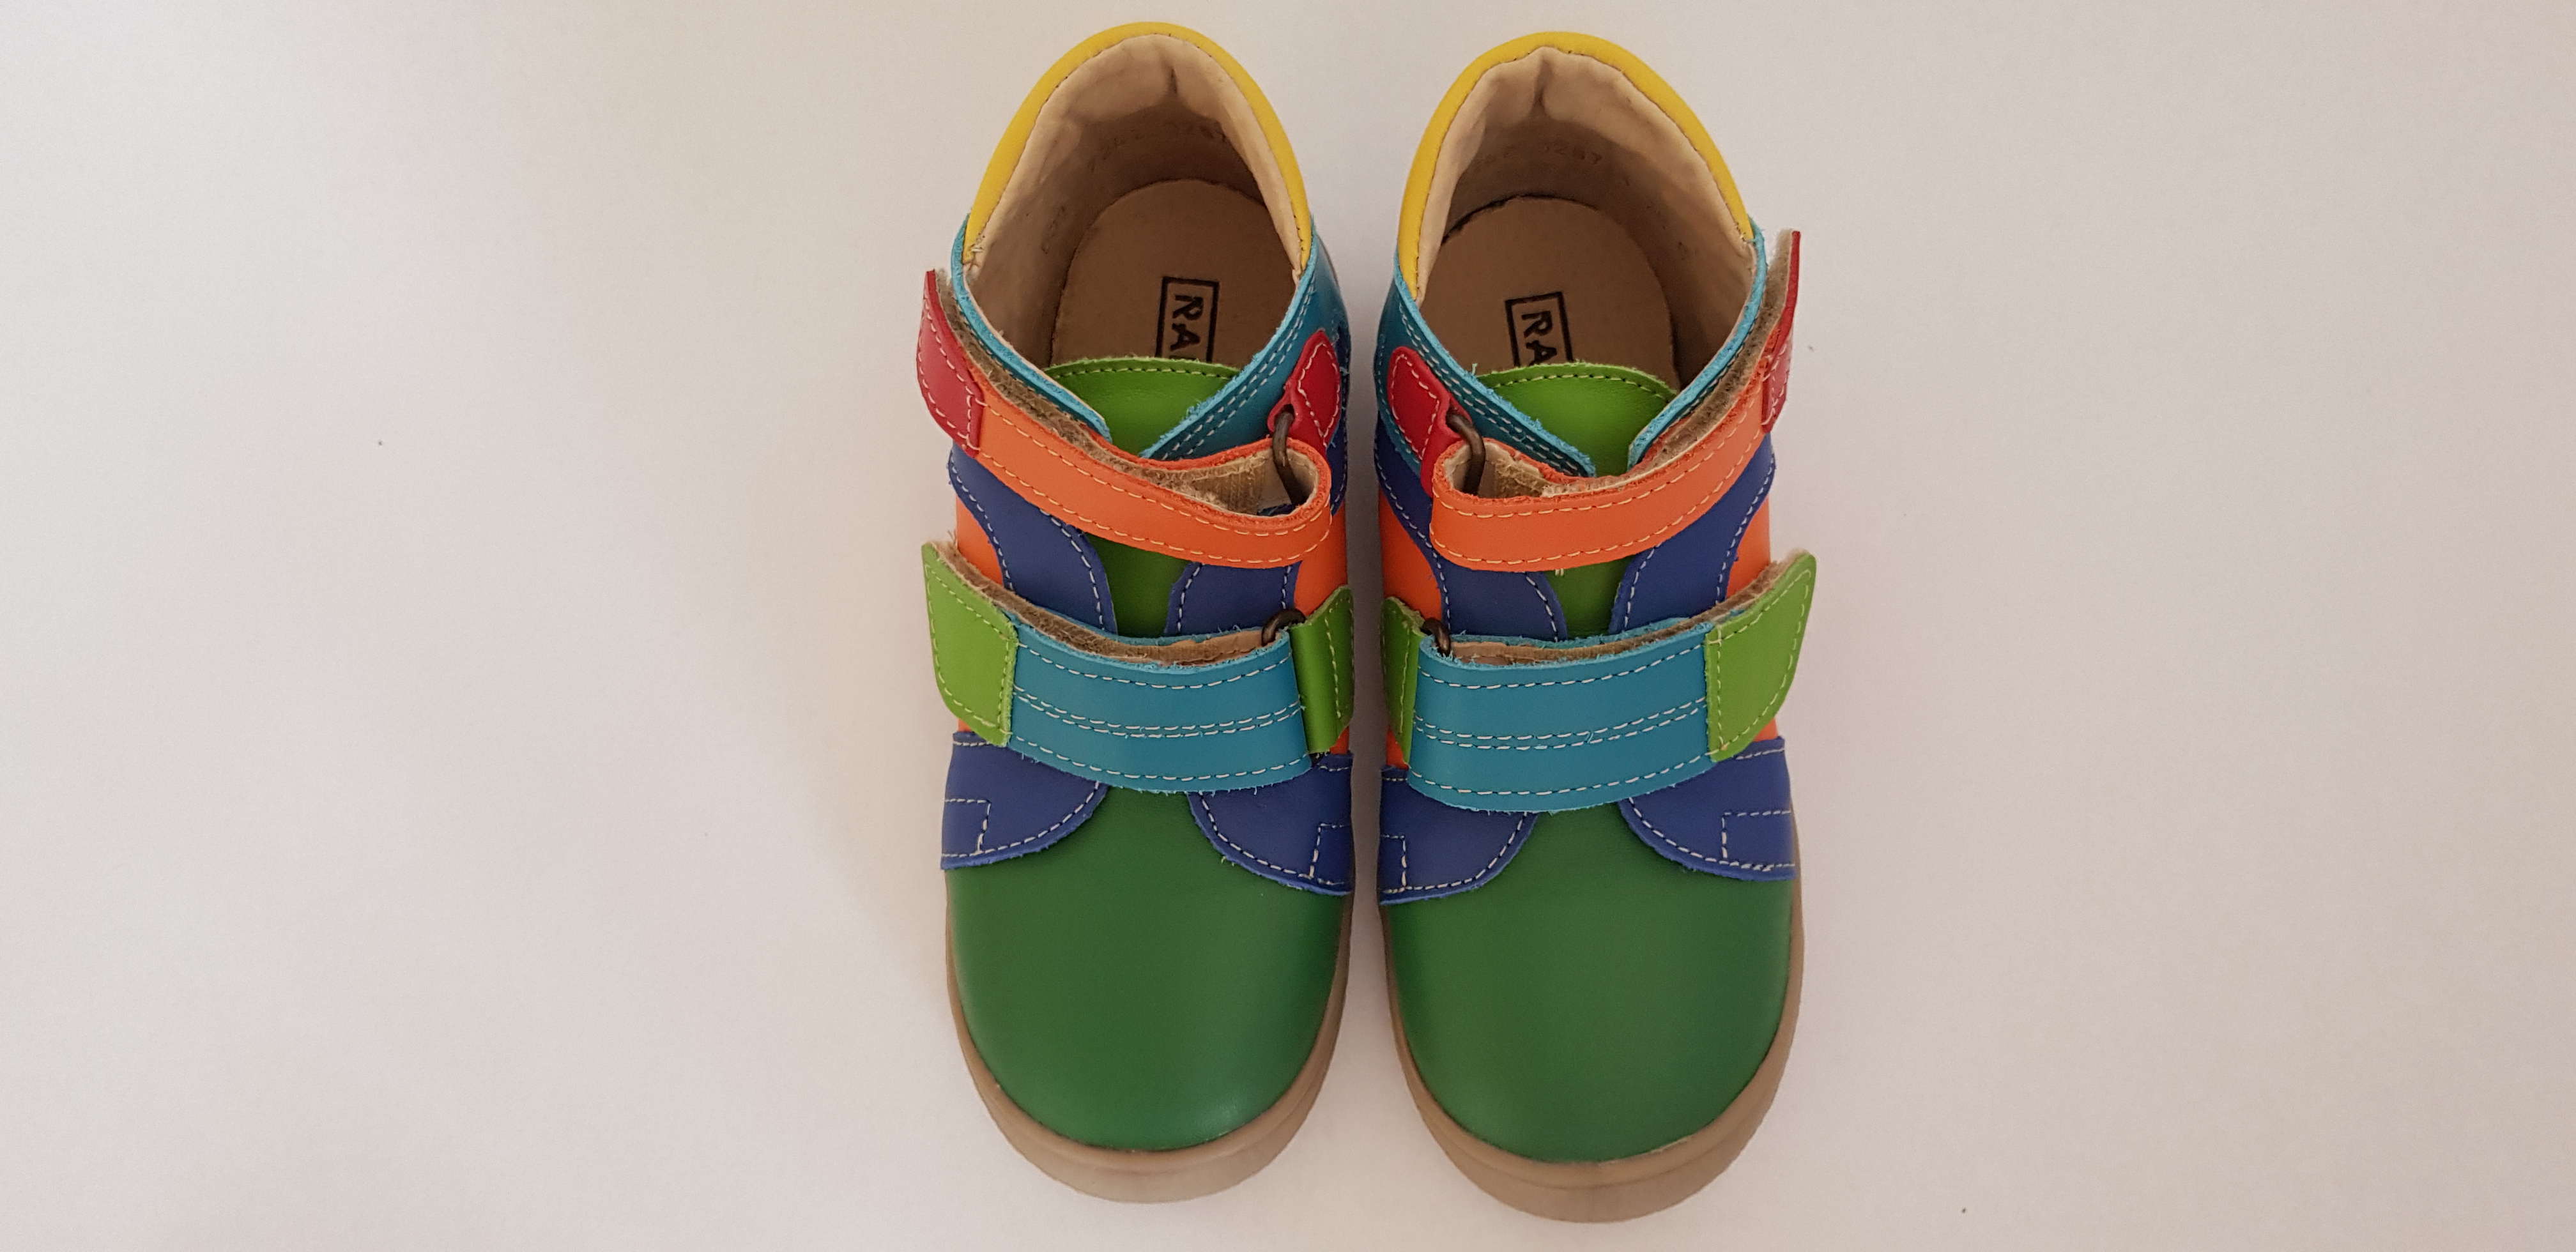 Colourful, Rainbow Handmade High-quality Leather Children Shoes with hook-and-loop fasteners and round toebox viewed from top